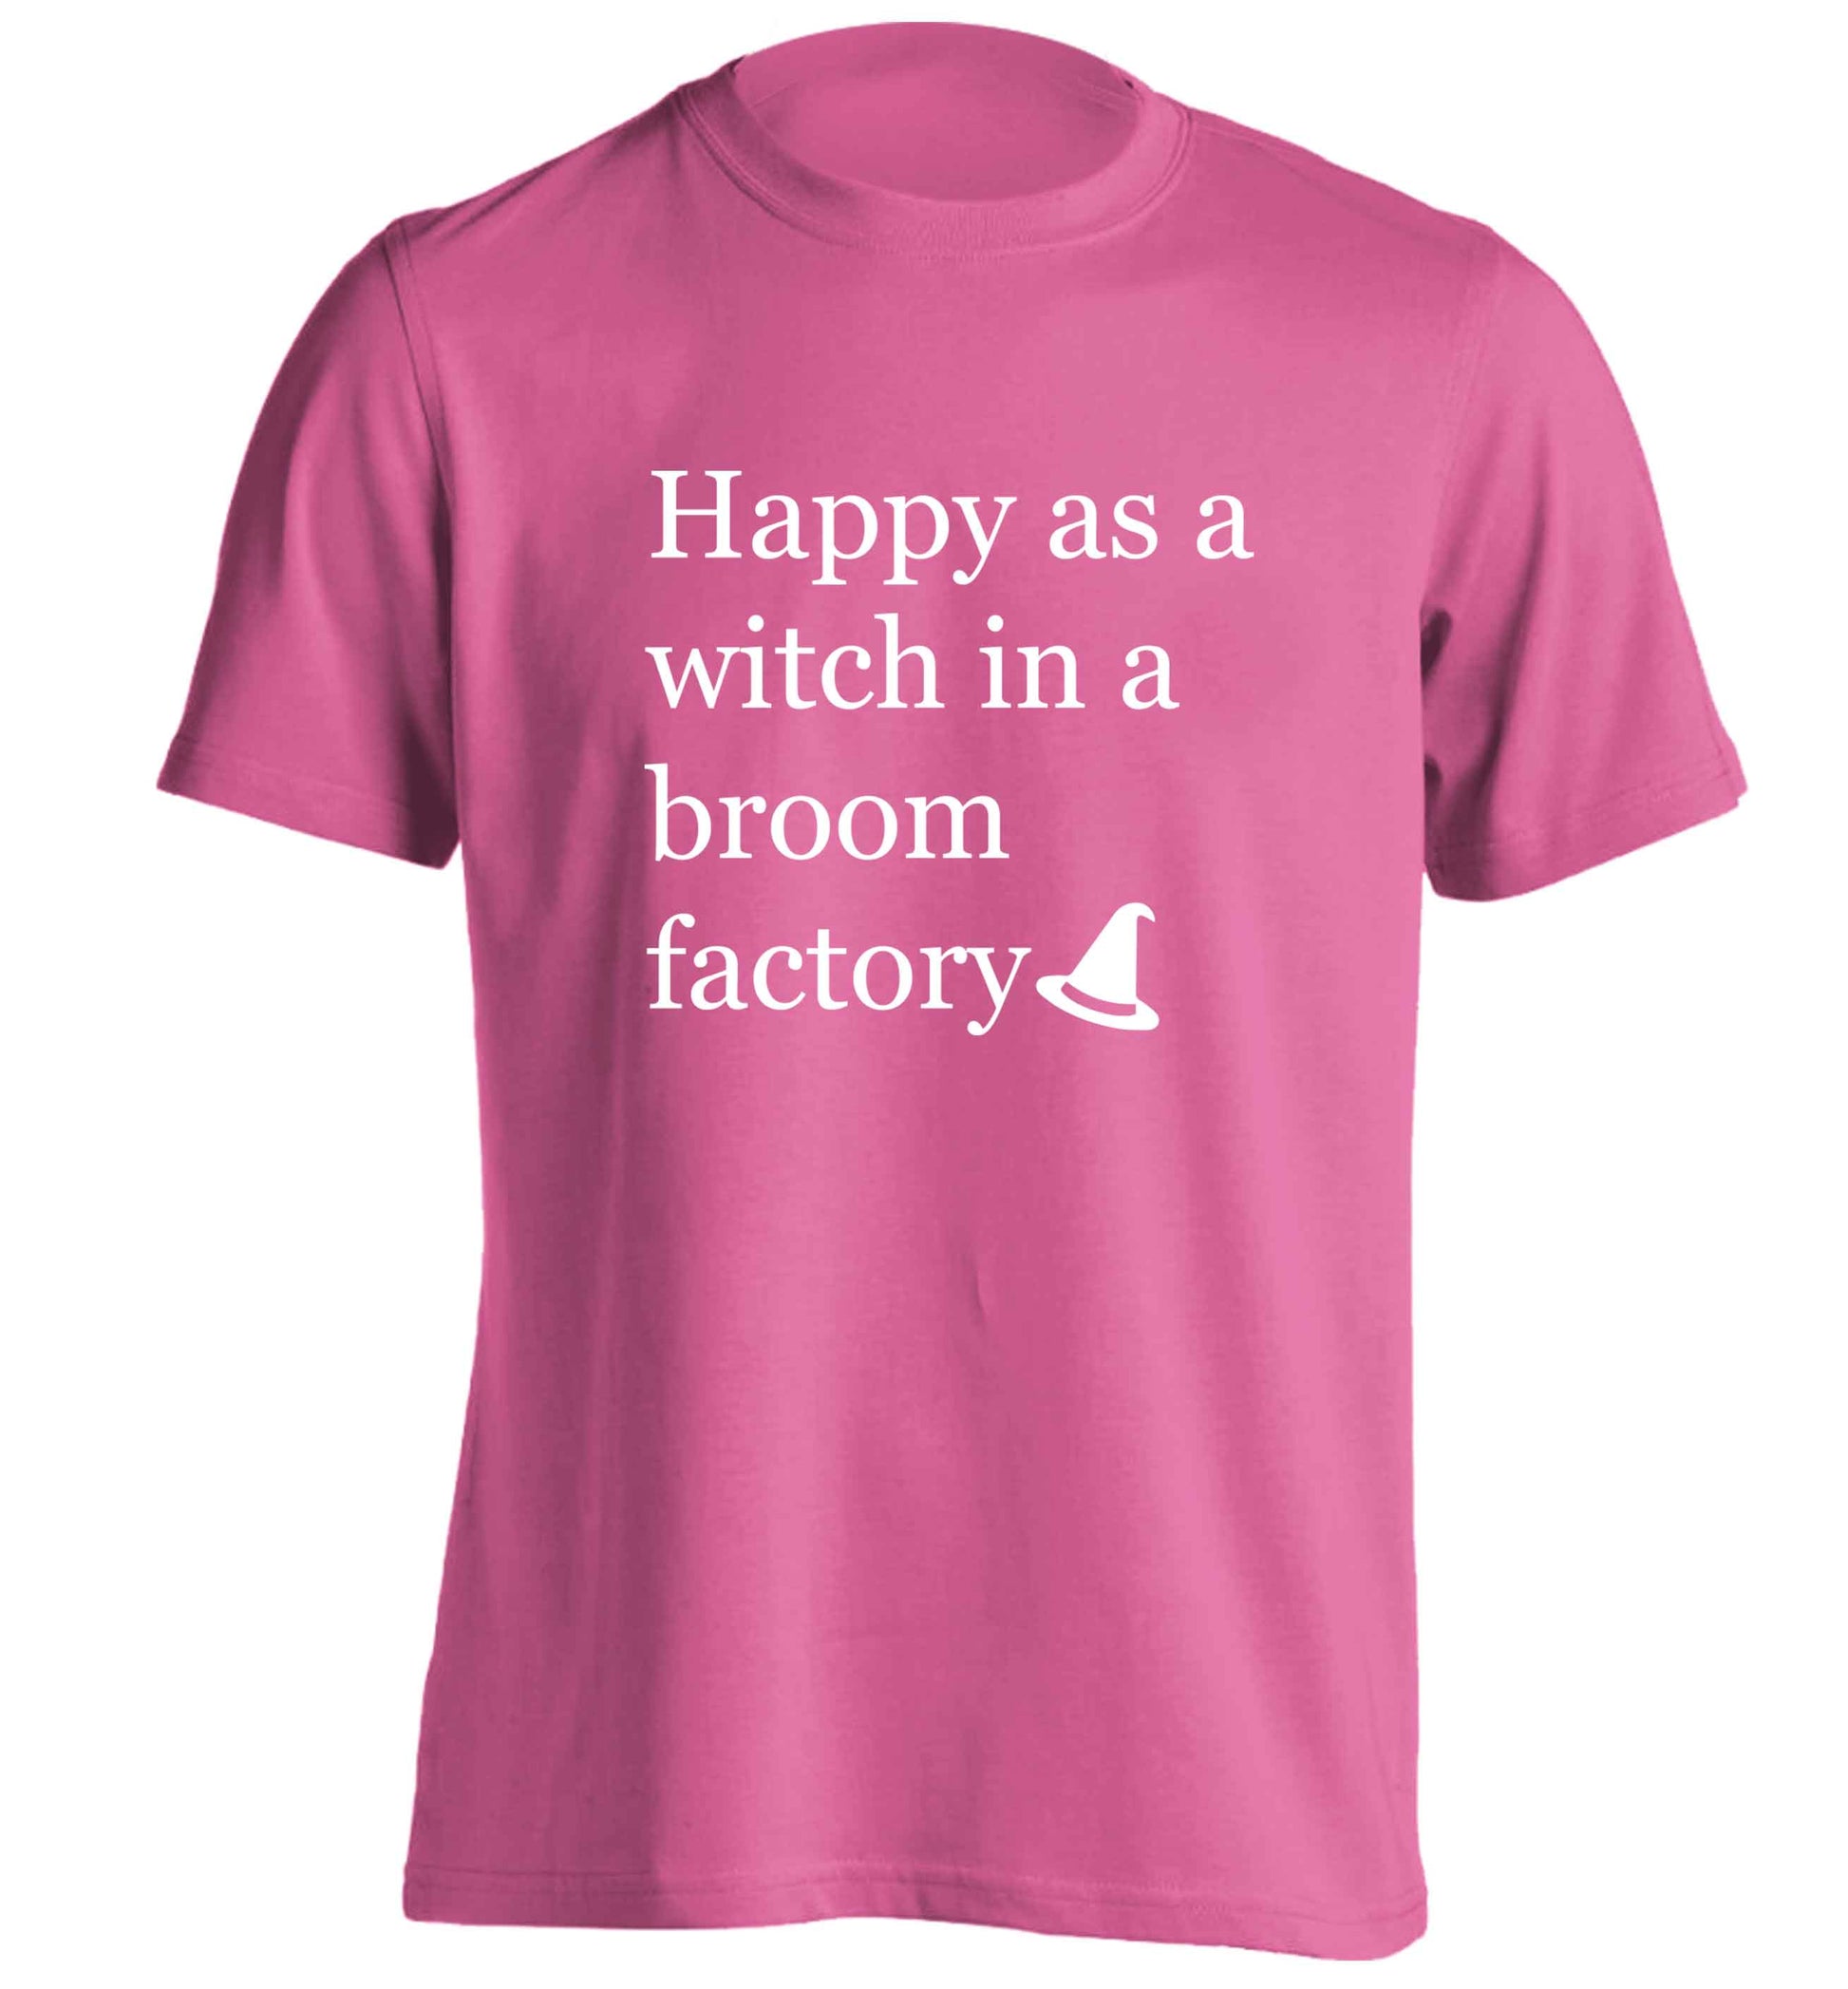 Happy as a witch in a broom factory adults unisex pink Tshirt 2XL